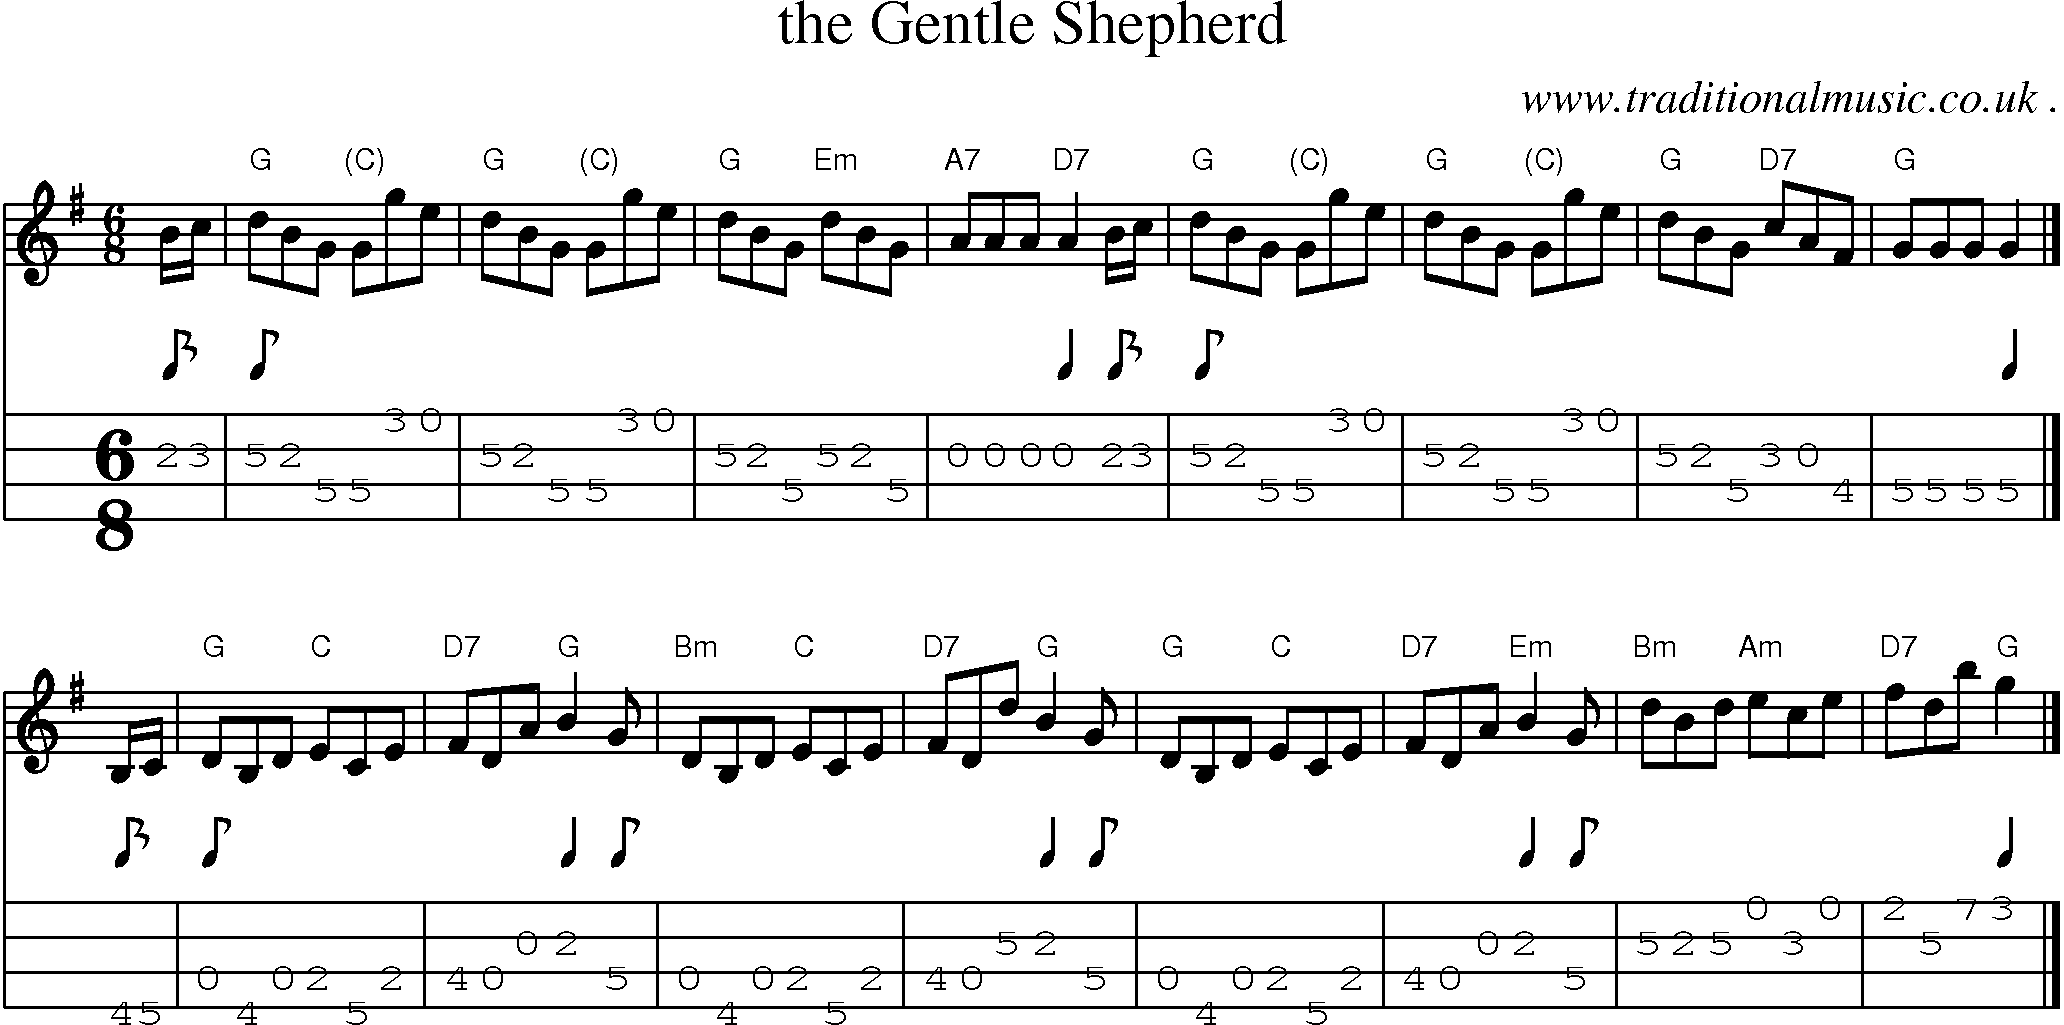 Sheet-music  score, Chords and Mandolin Tabs for The Gentle Shepherd